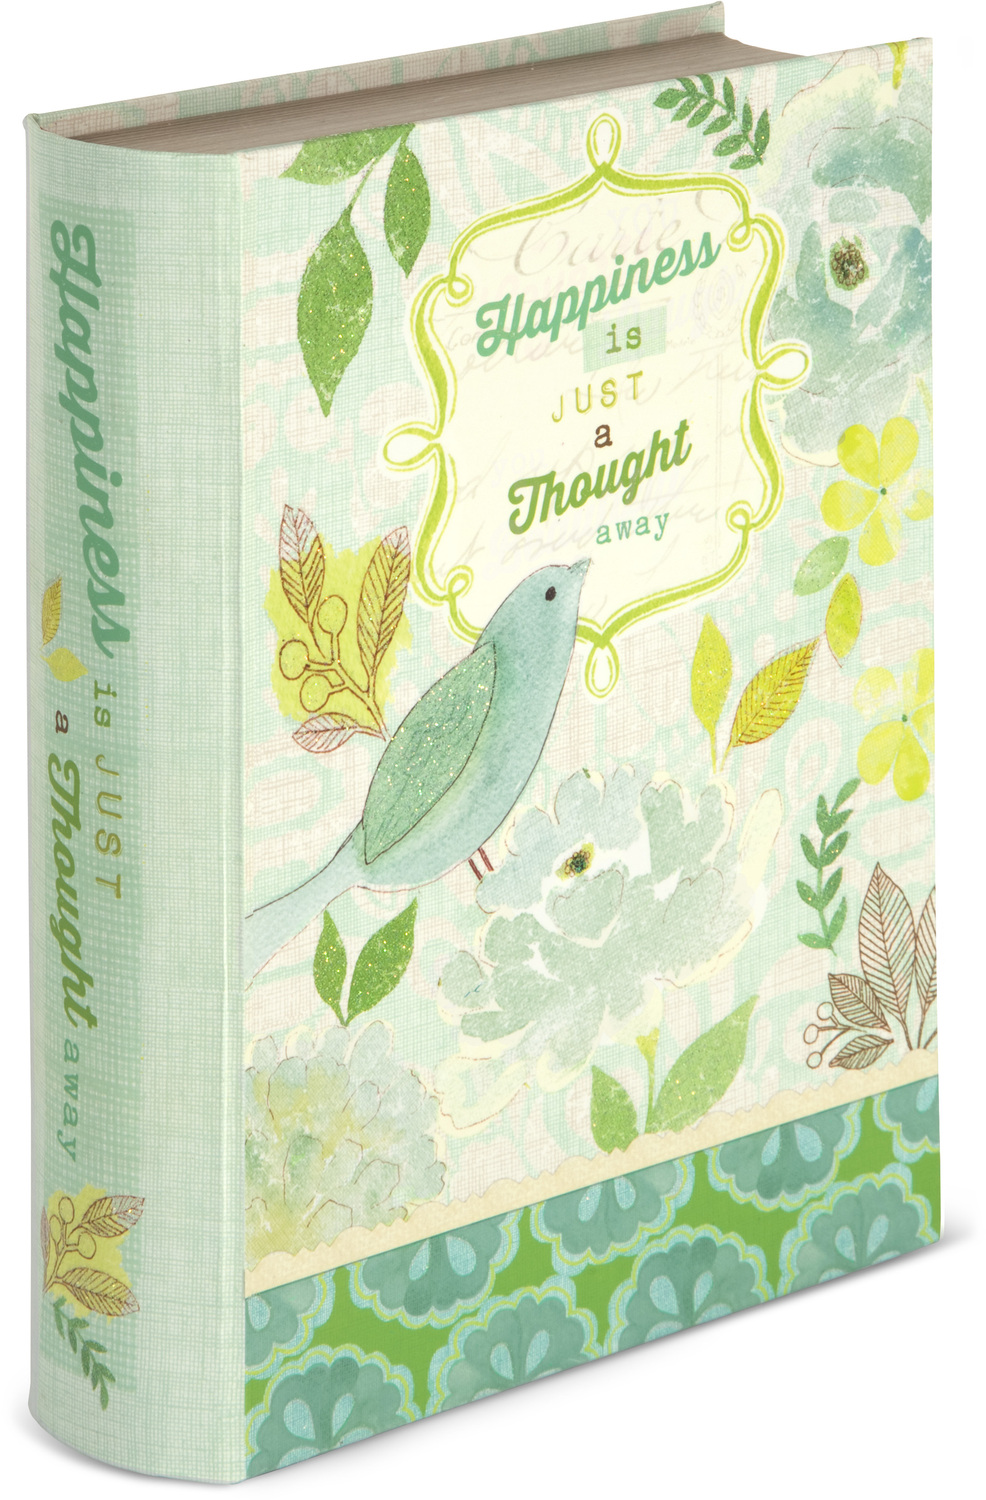 Happiness by Vintage by Stephanie Ryan - Happiness - 6.5" x 2" x 8.5" Musical Book Box